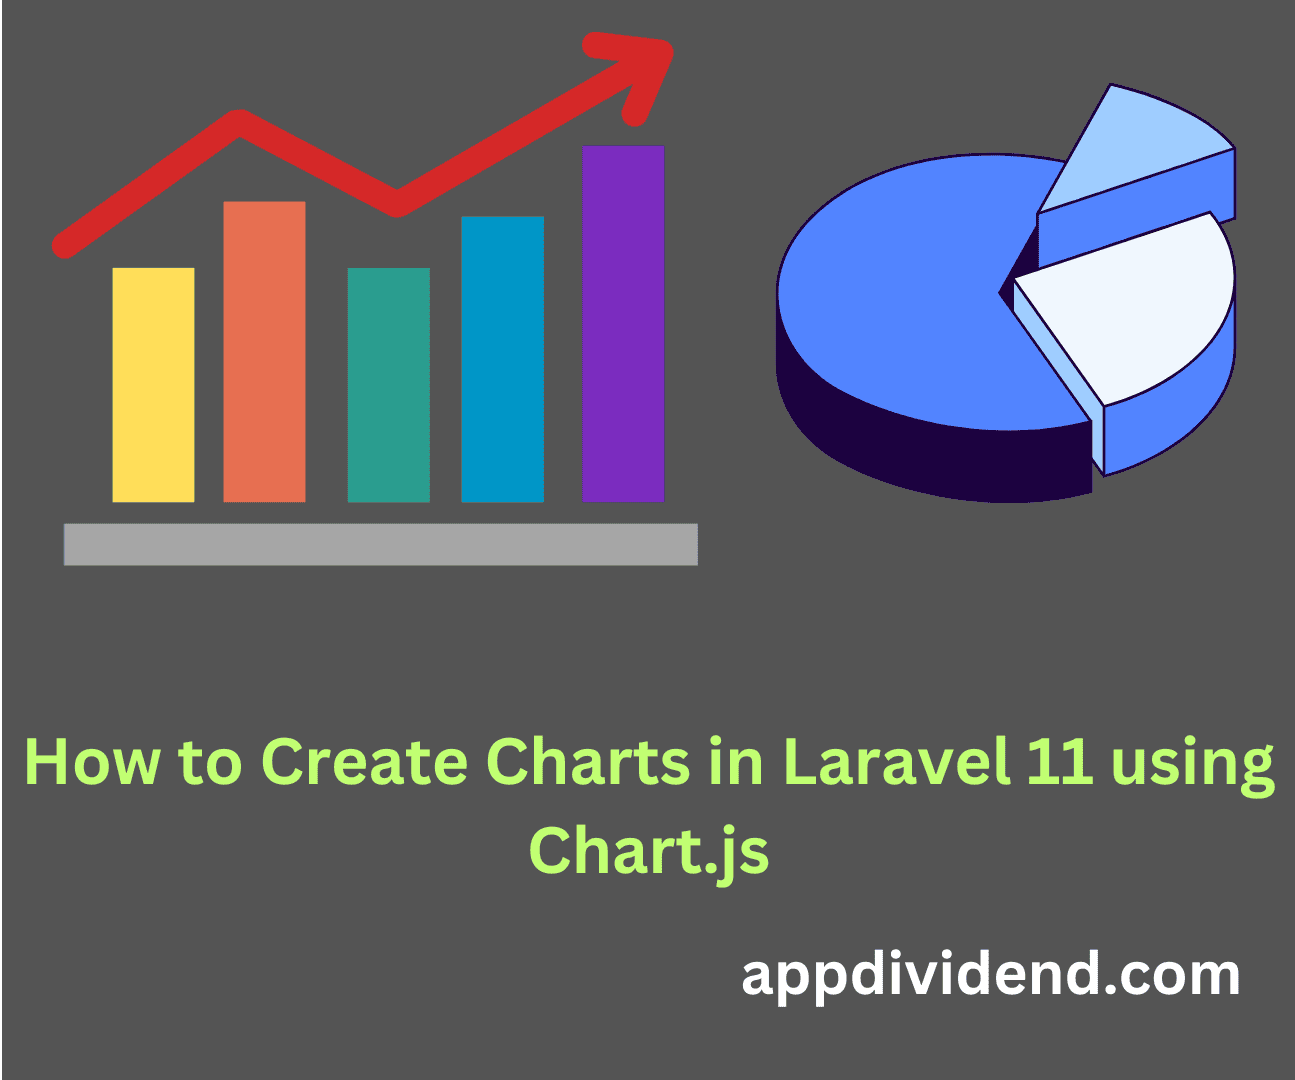 How to Create Charts in Laravel 11 using Chart.js